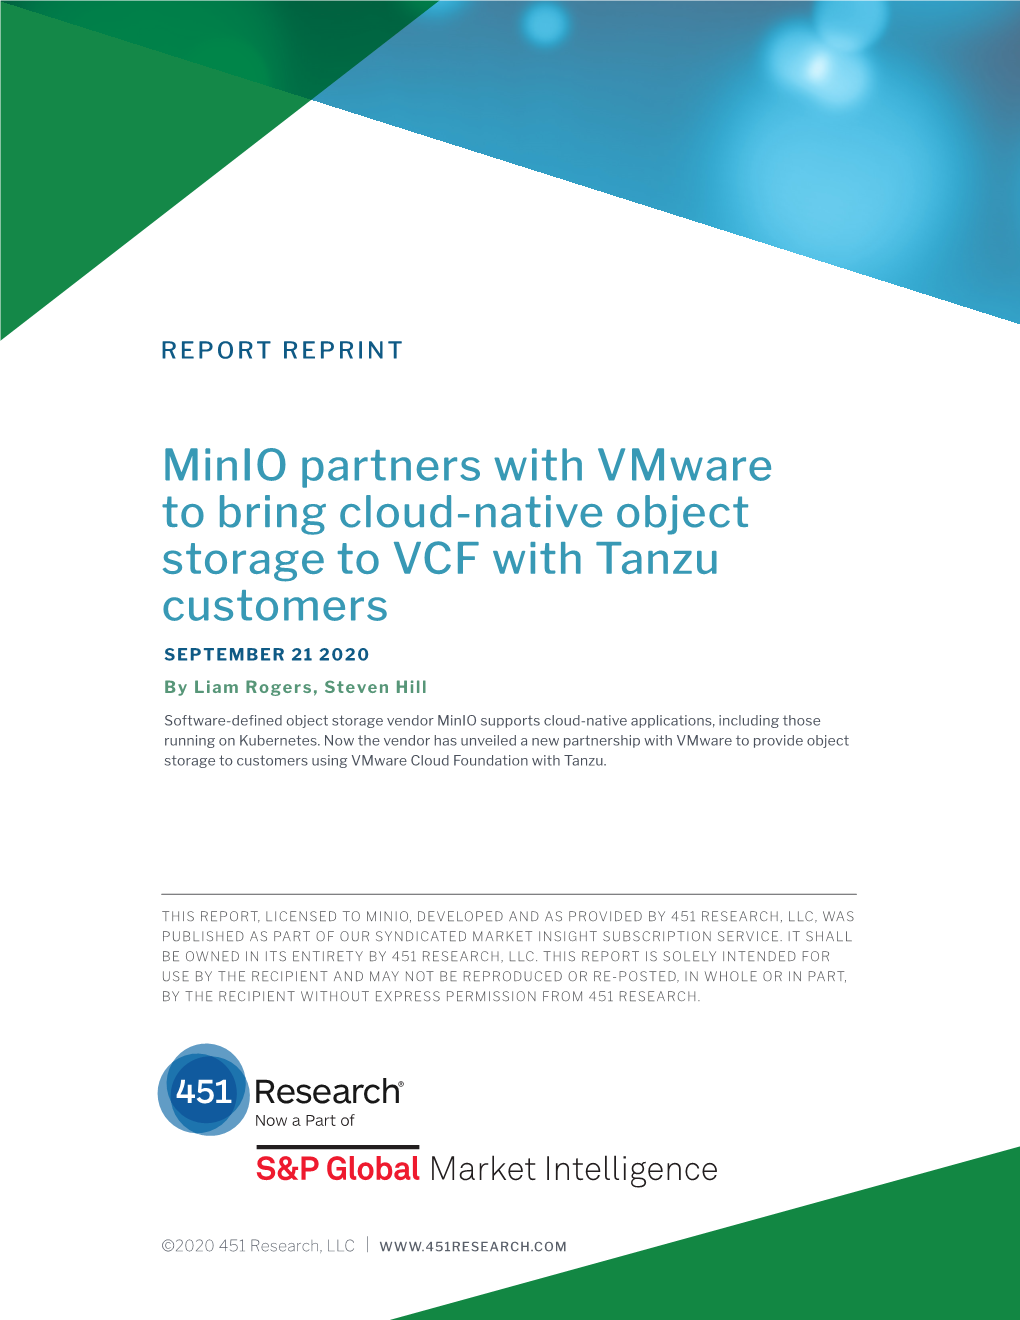 Minio Partners with Vmware to Bring Cloud-Native Object Storage to VCF with Tanzu Customers